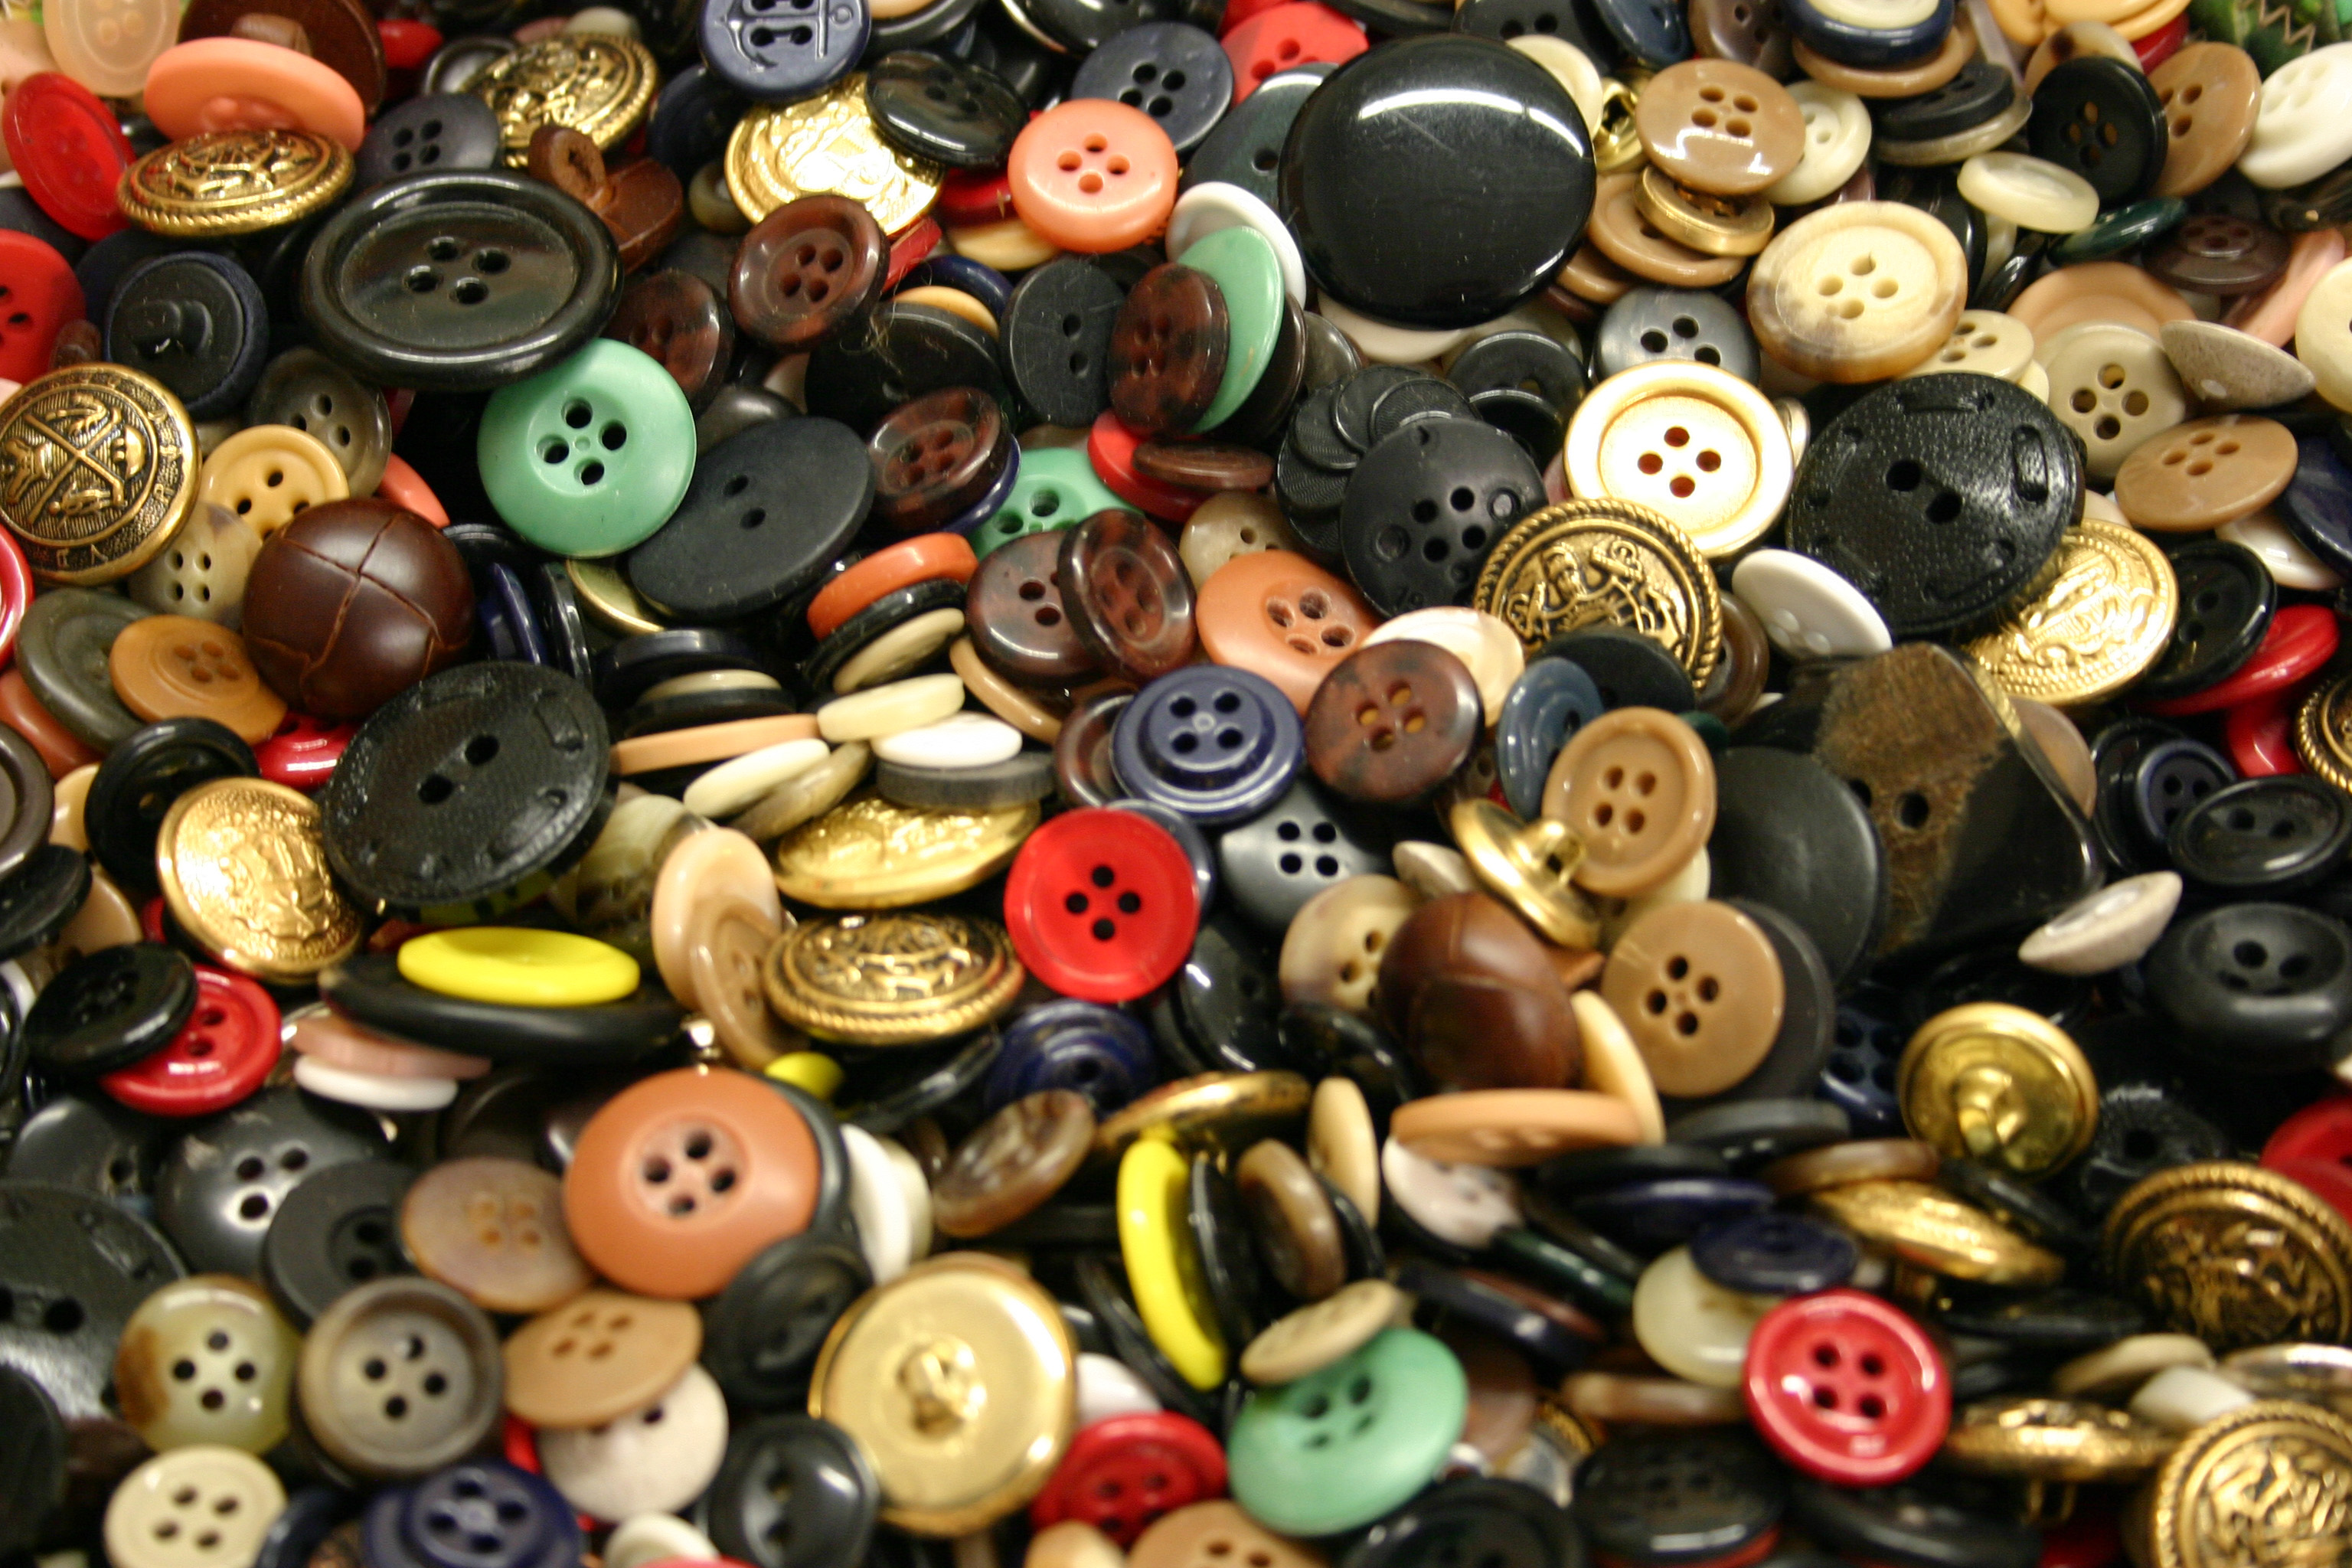 Bulk Buy Buttons of Mixed Colors, Assorted Shapes, Varies Sizes - 50 grams (70-200 buttons)